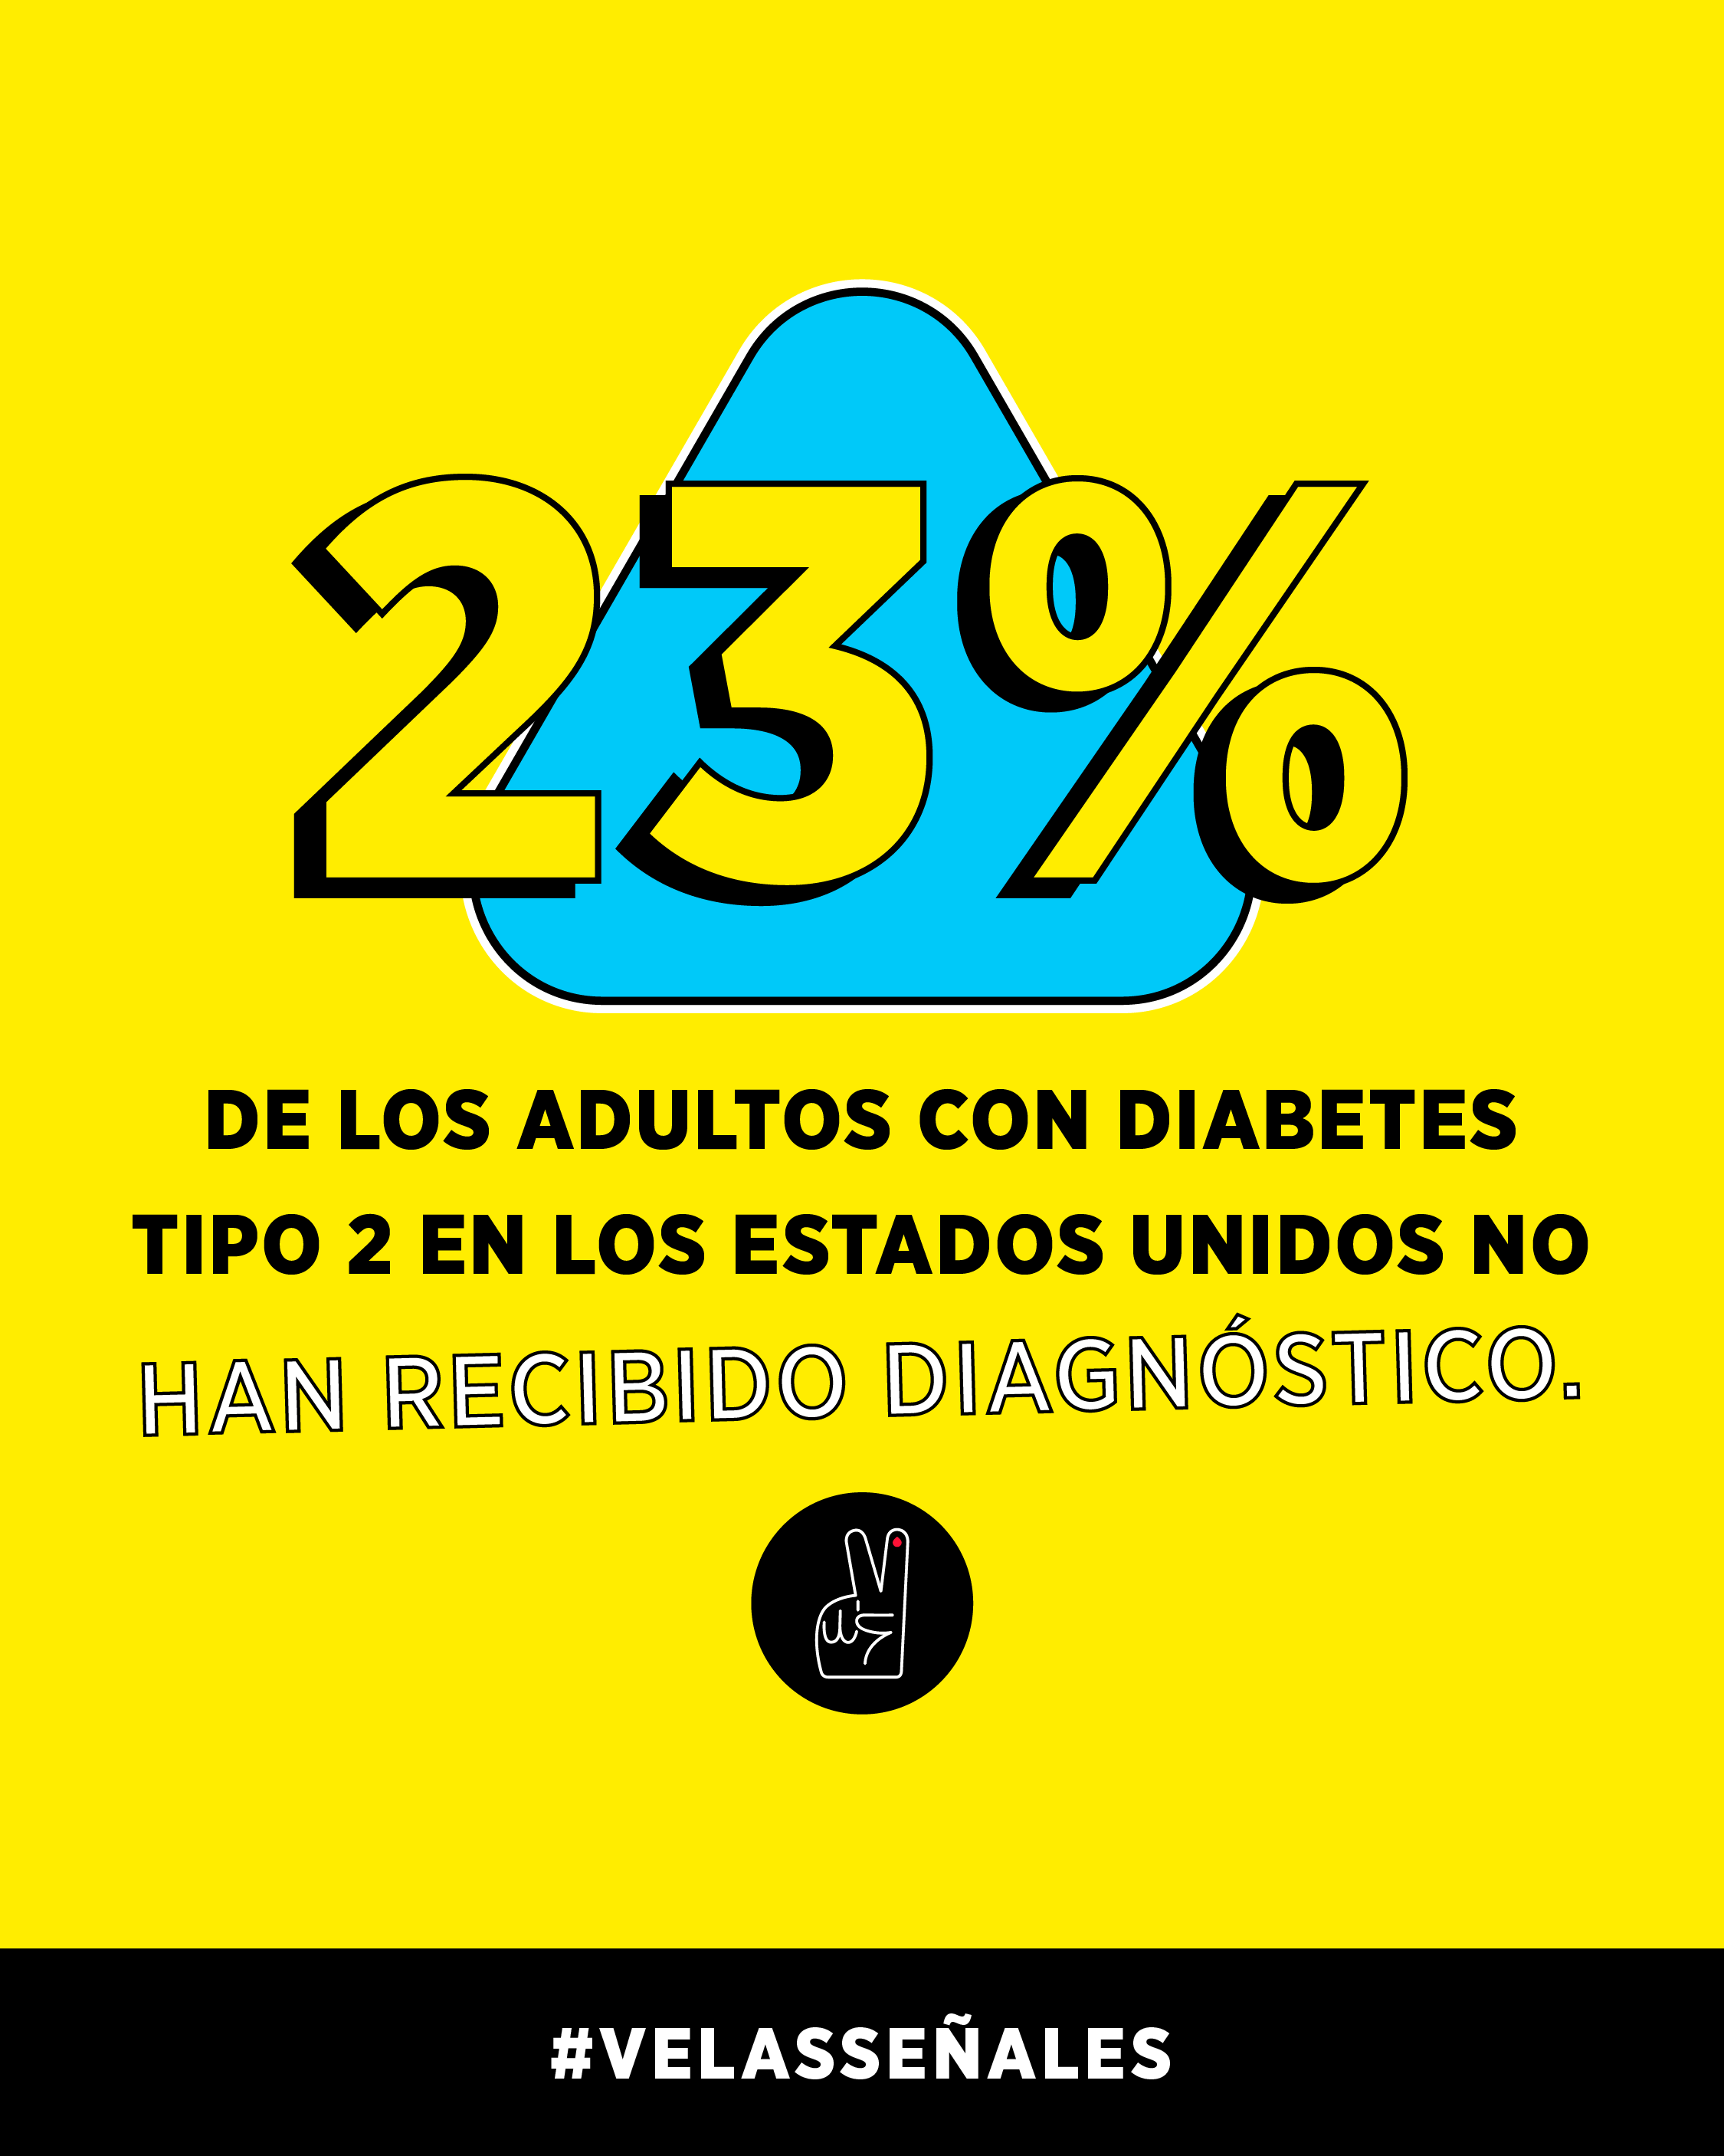 23% of all U.S. adults with type 2 diabetes are undiagnosed